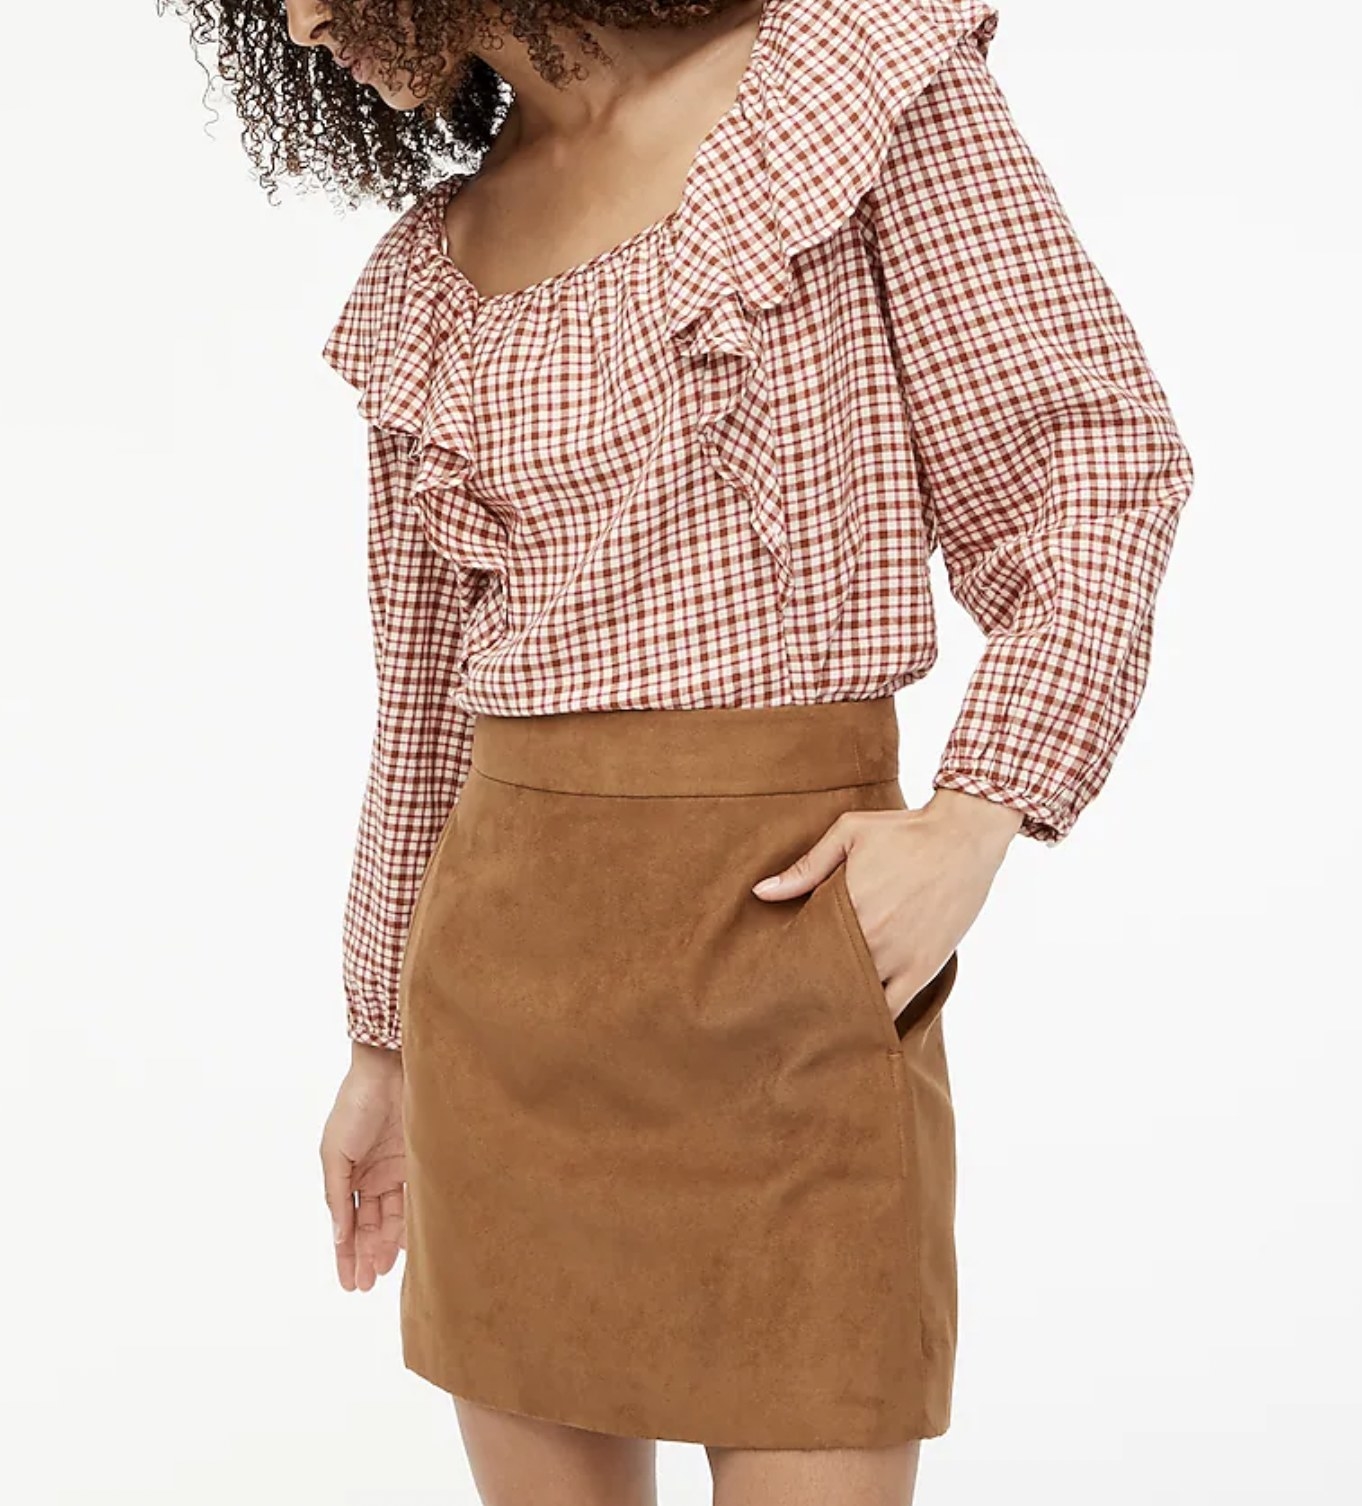 the skirt in brown